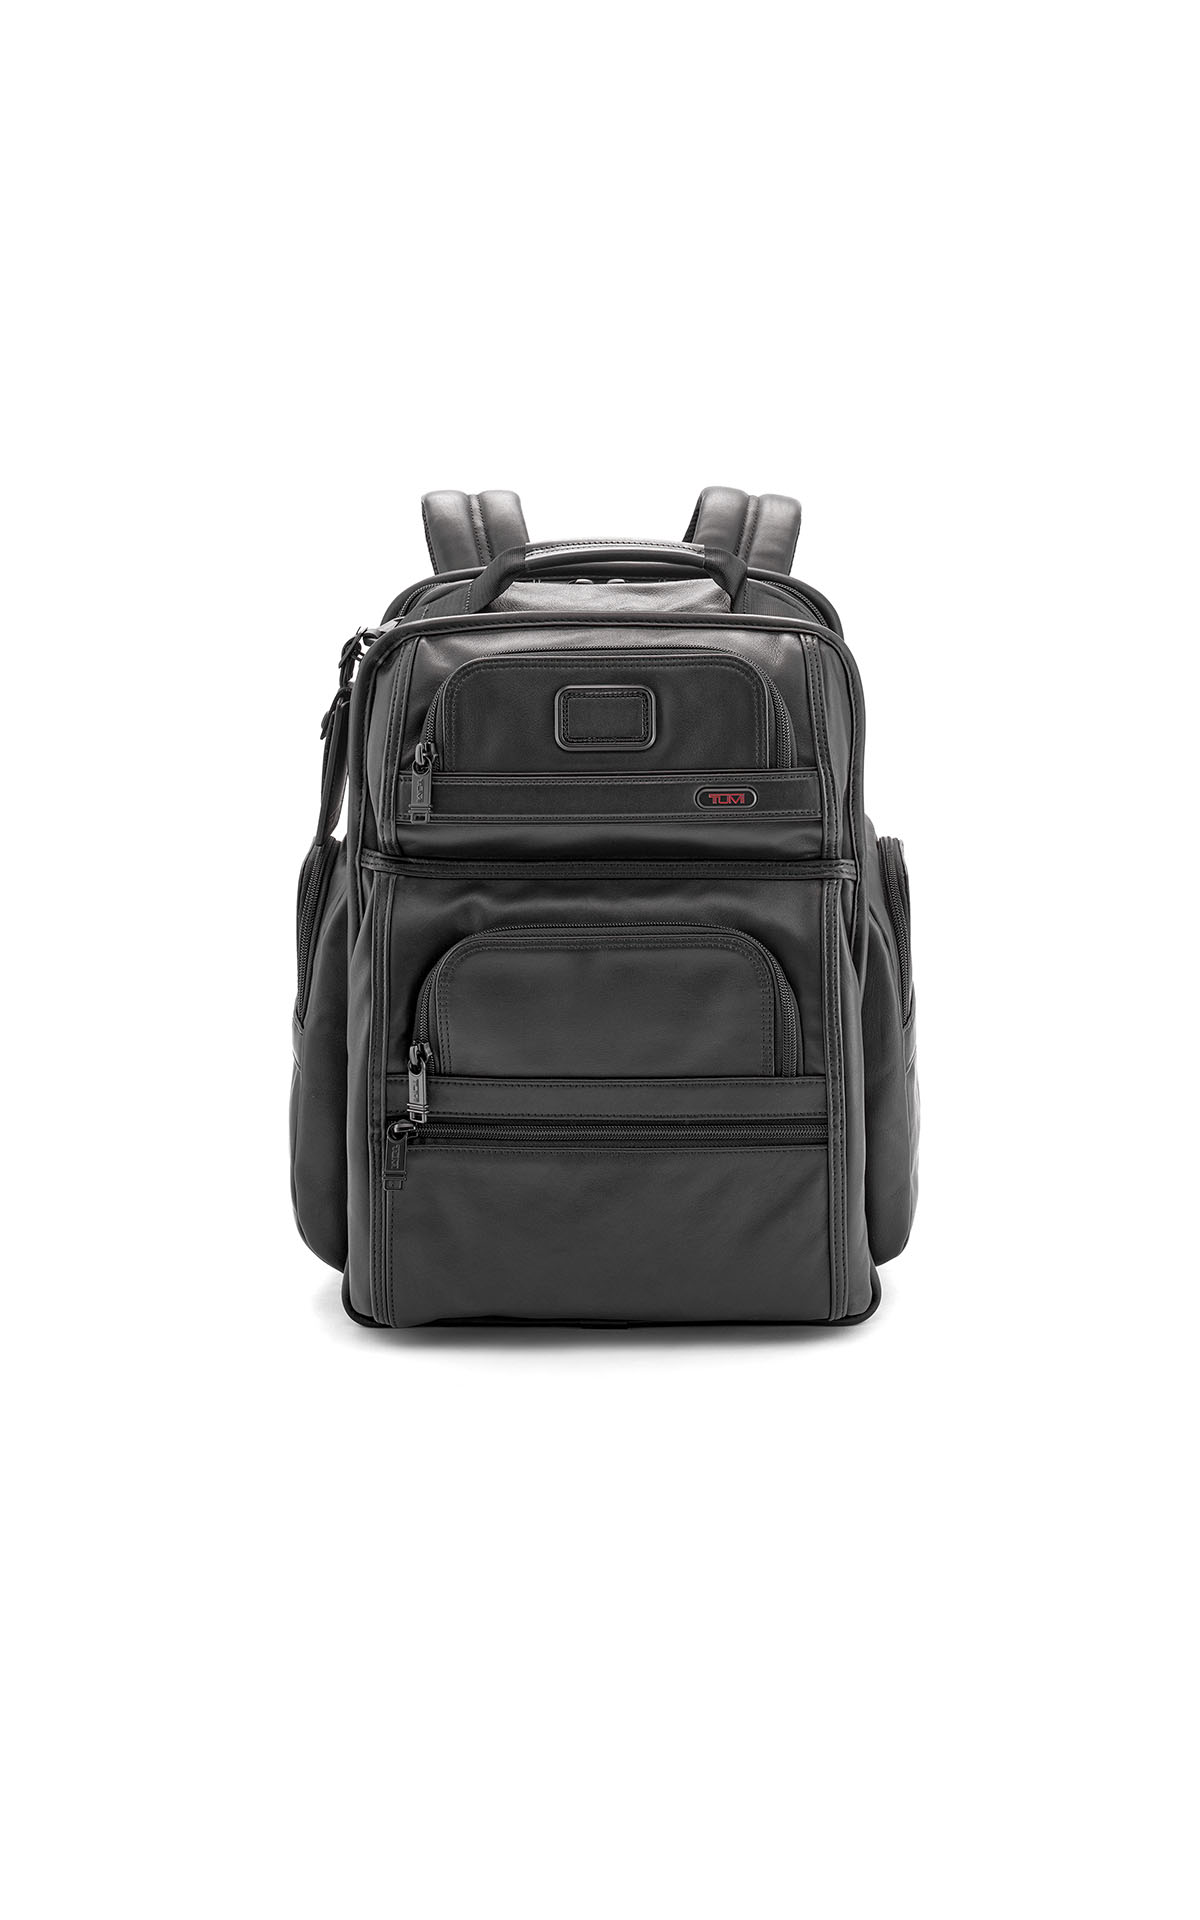 Tumi Brief Pack at The Bicester Village Shopping Collection